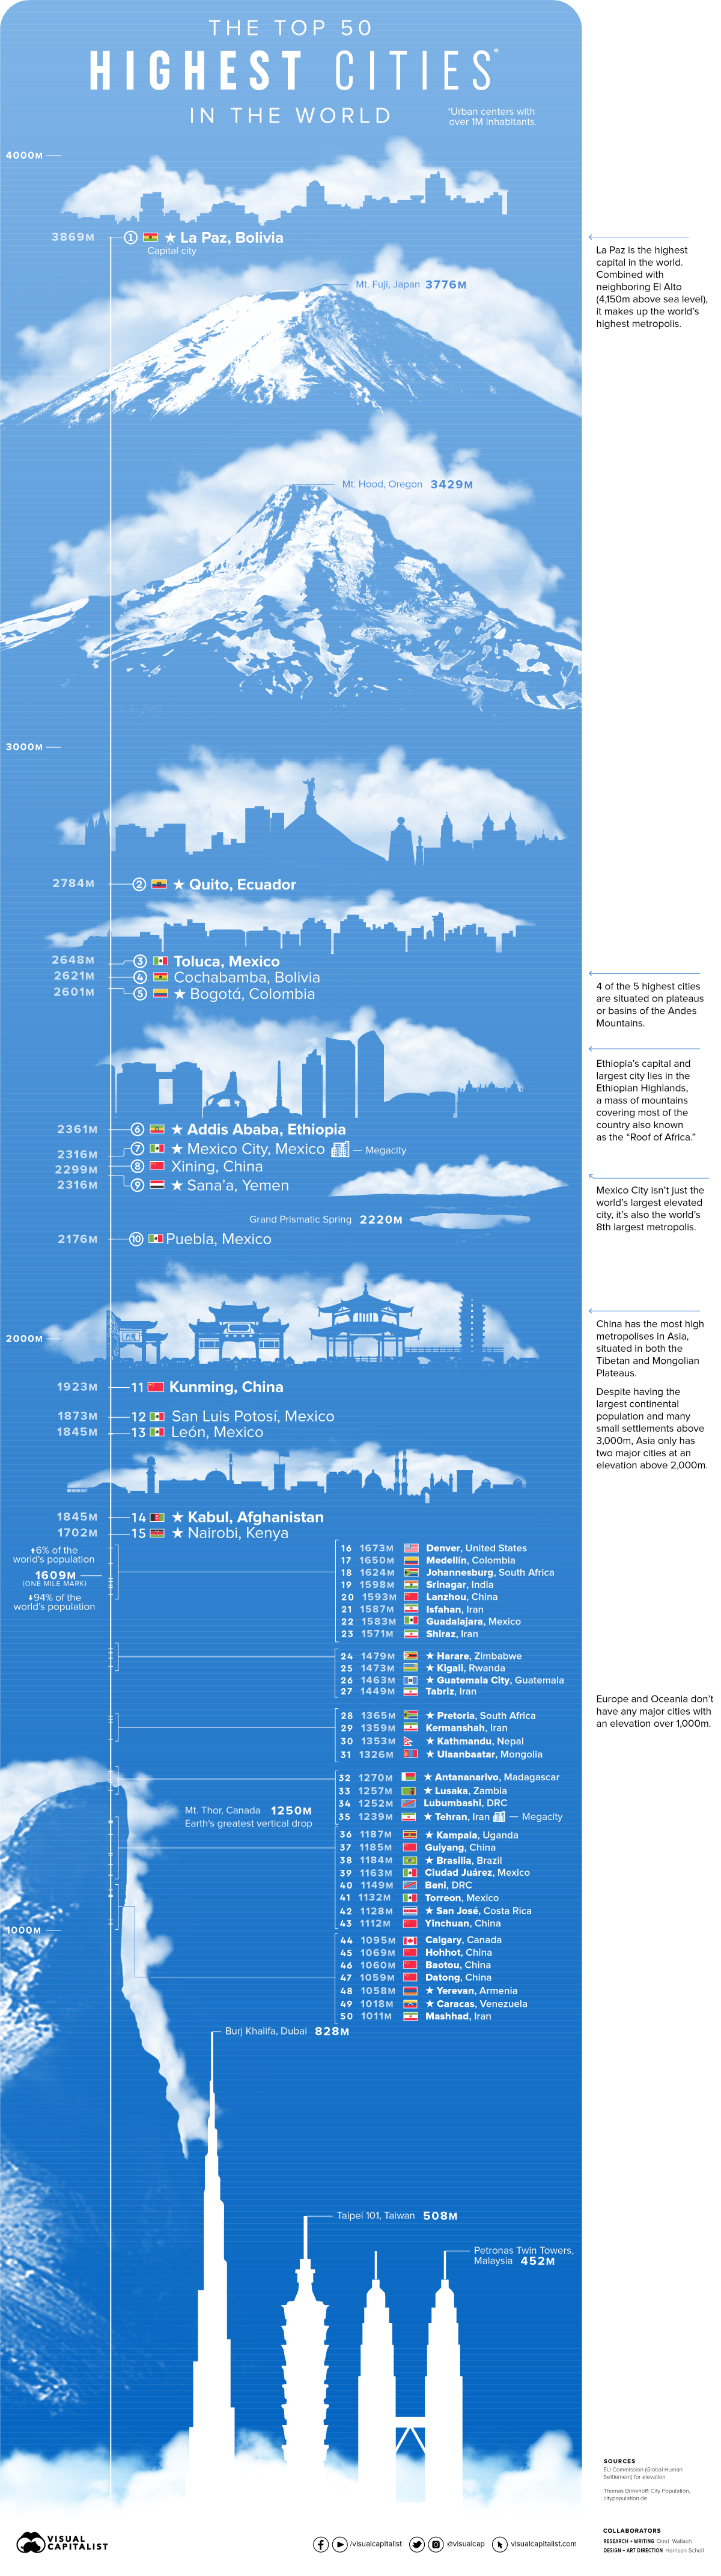 The 50 Highest Cities in the World